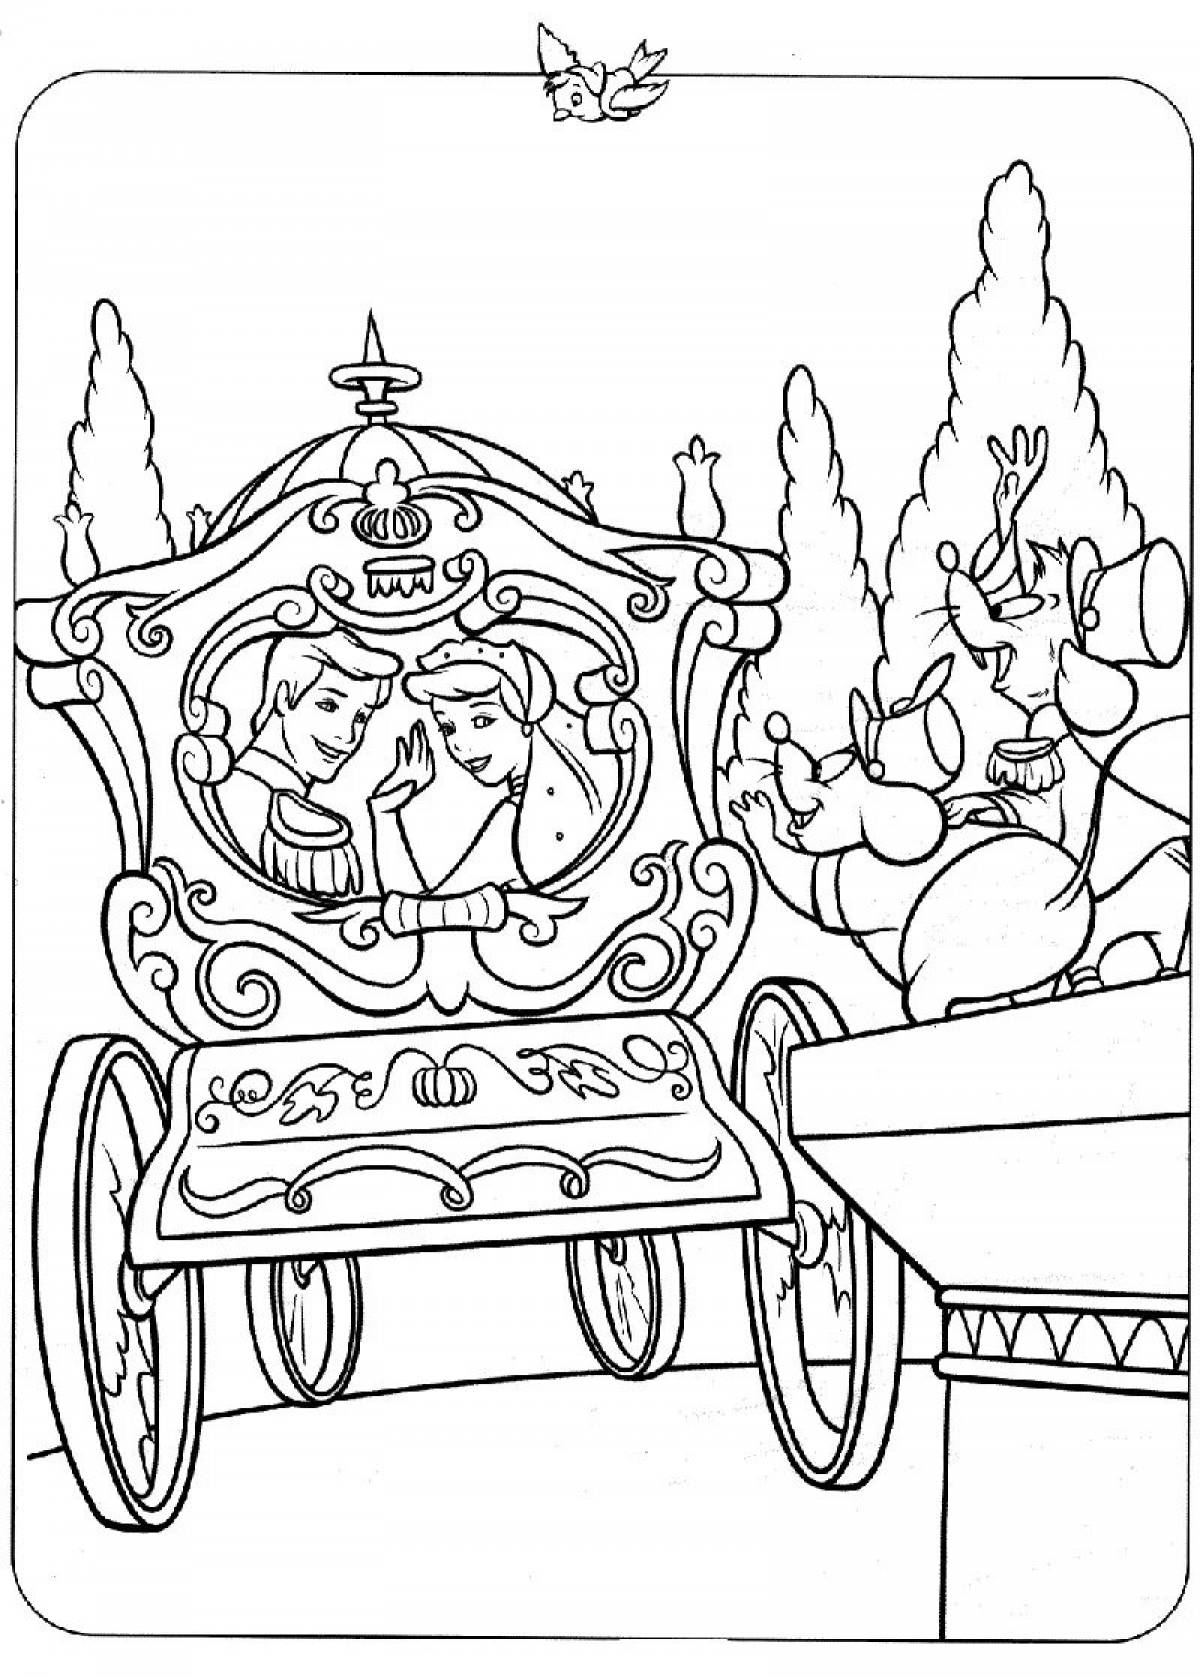 Princess in carriage #2